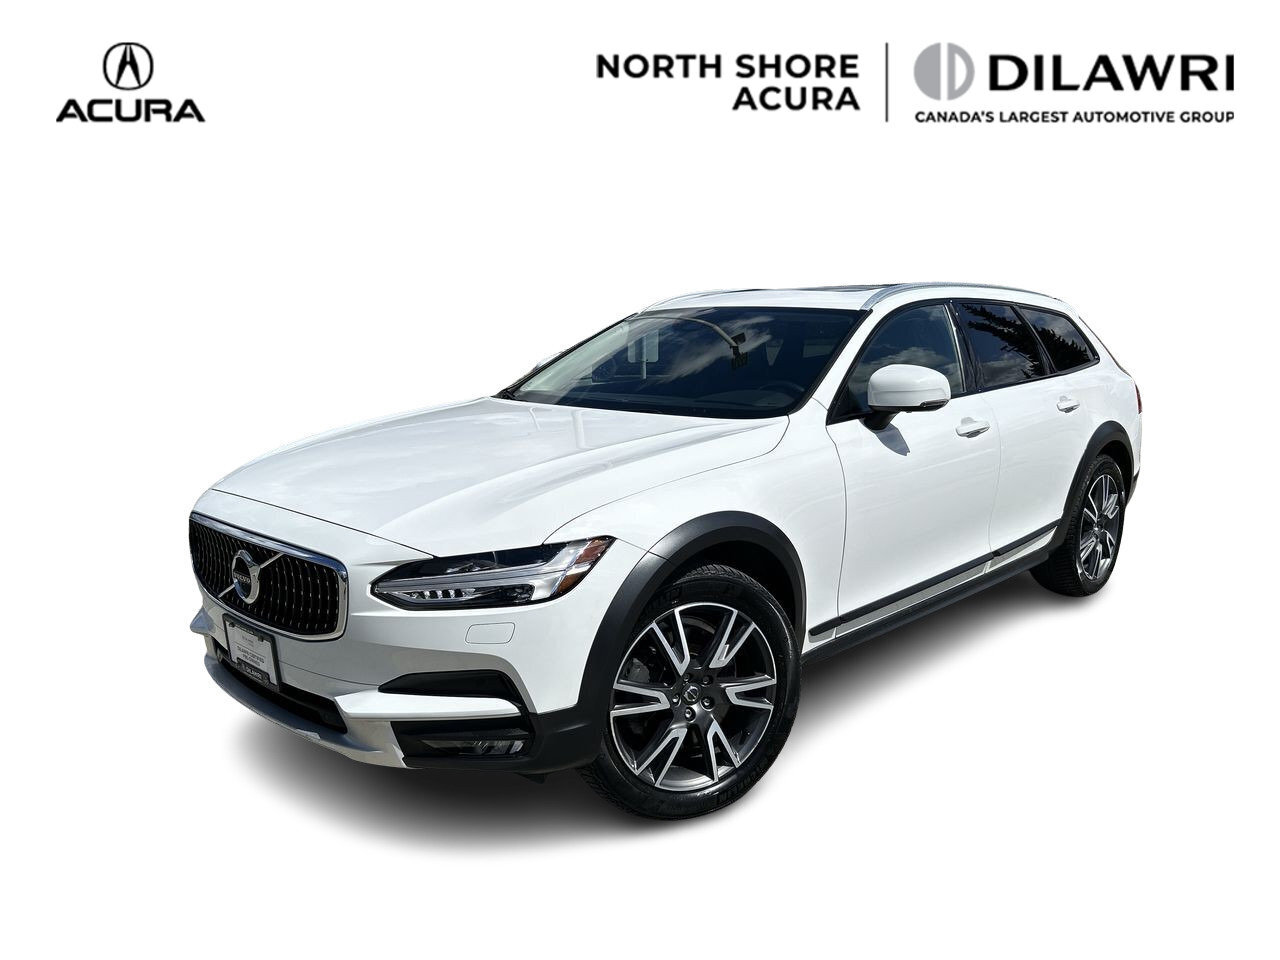 2018 Volvo V90 Cross Country T5 AWD * Low Kms, Leather, Navi, Pano Roof, Rare f